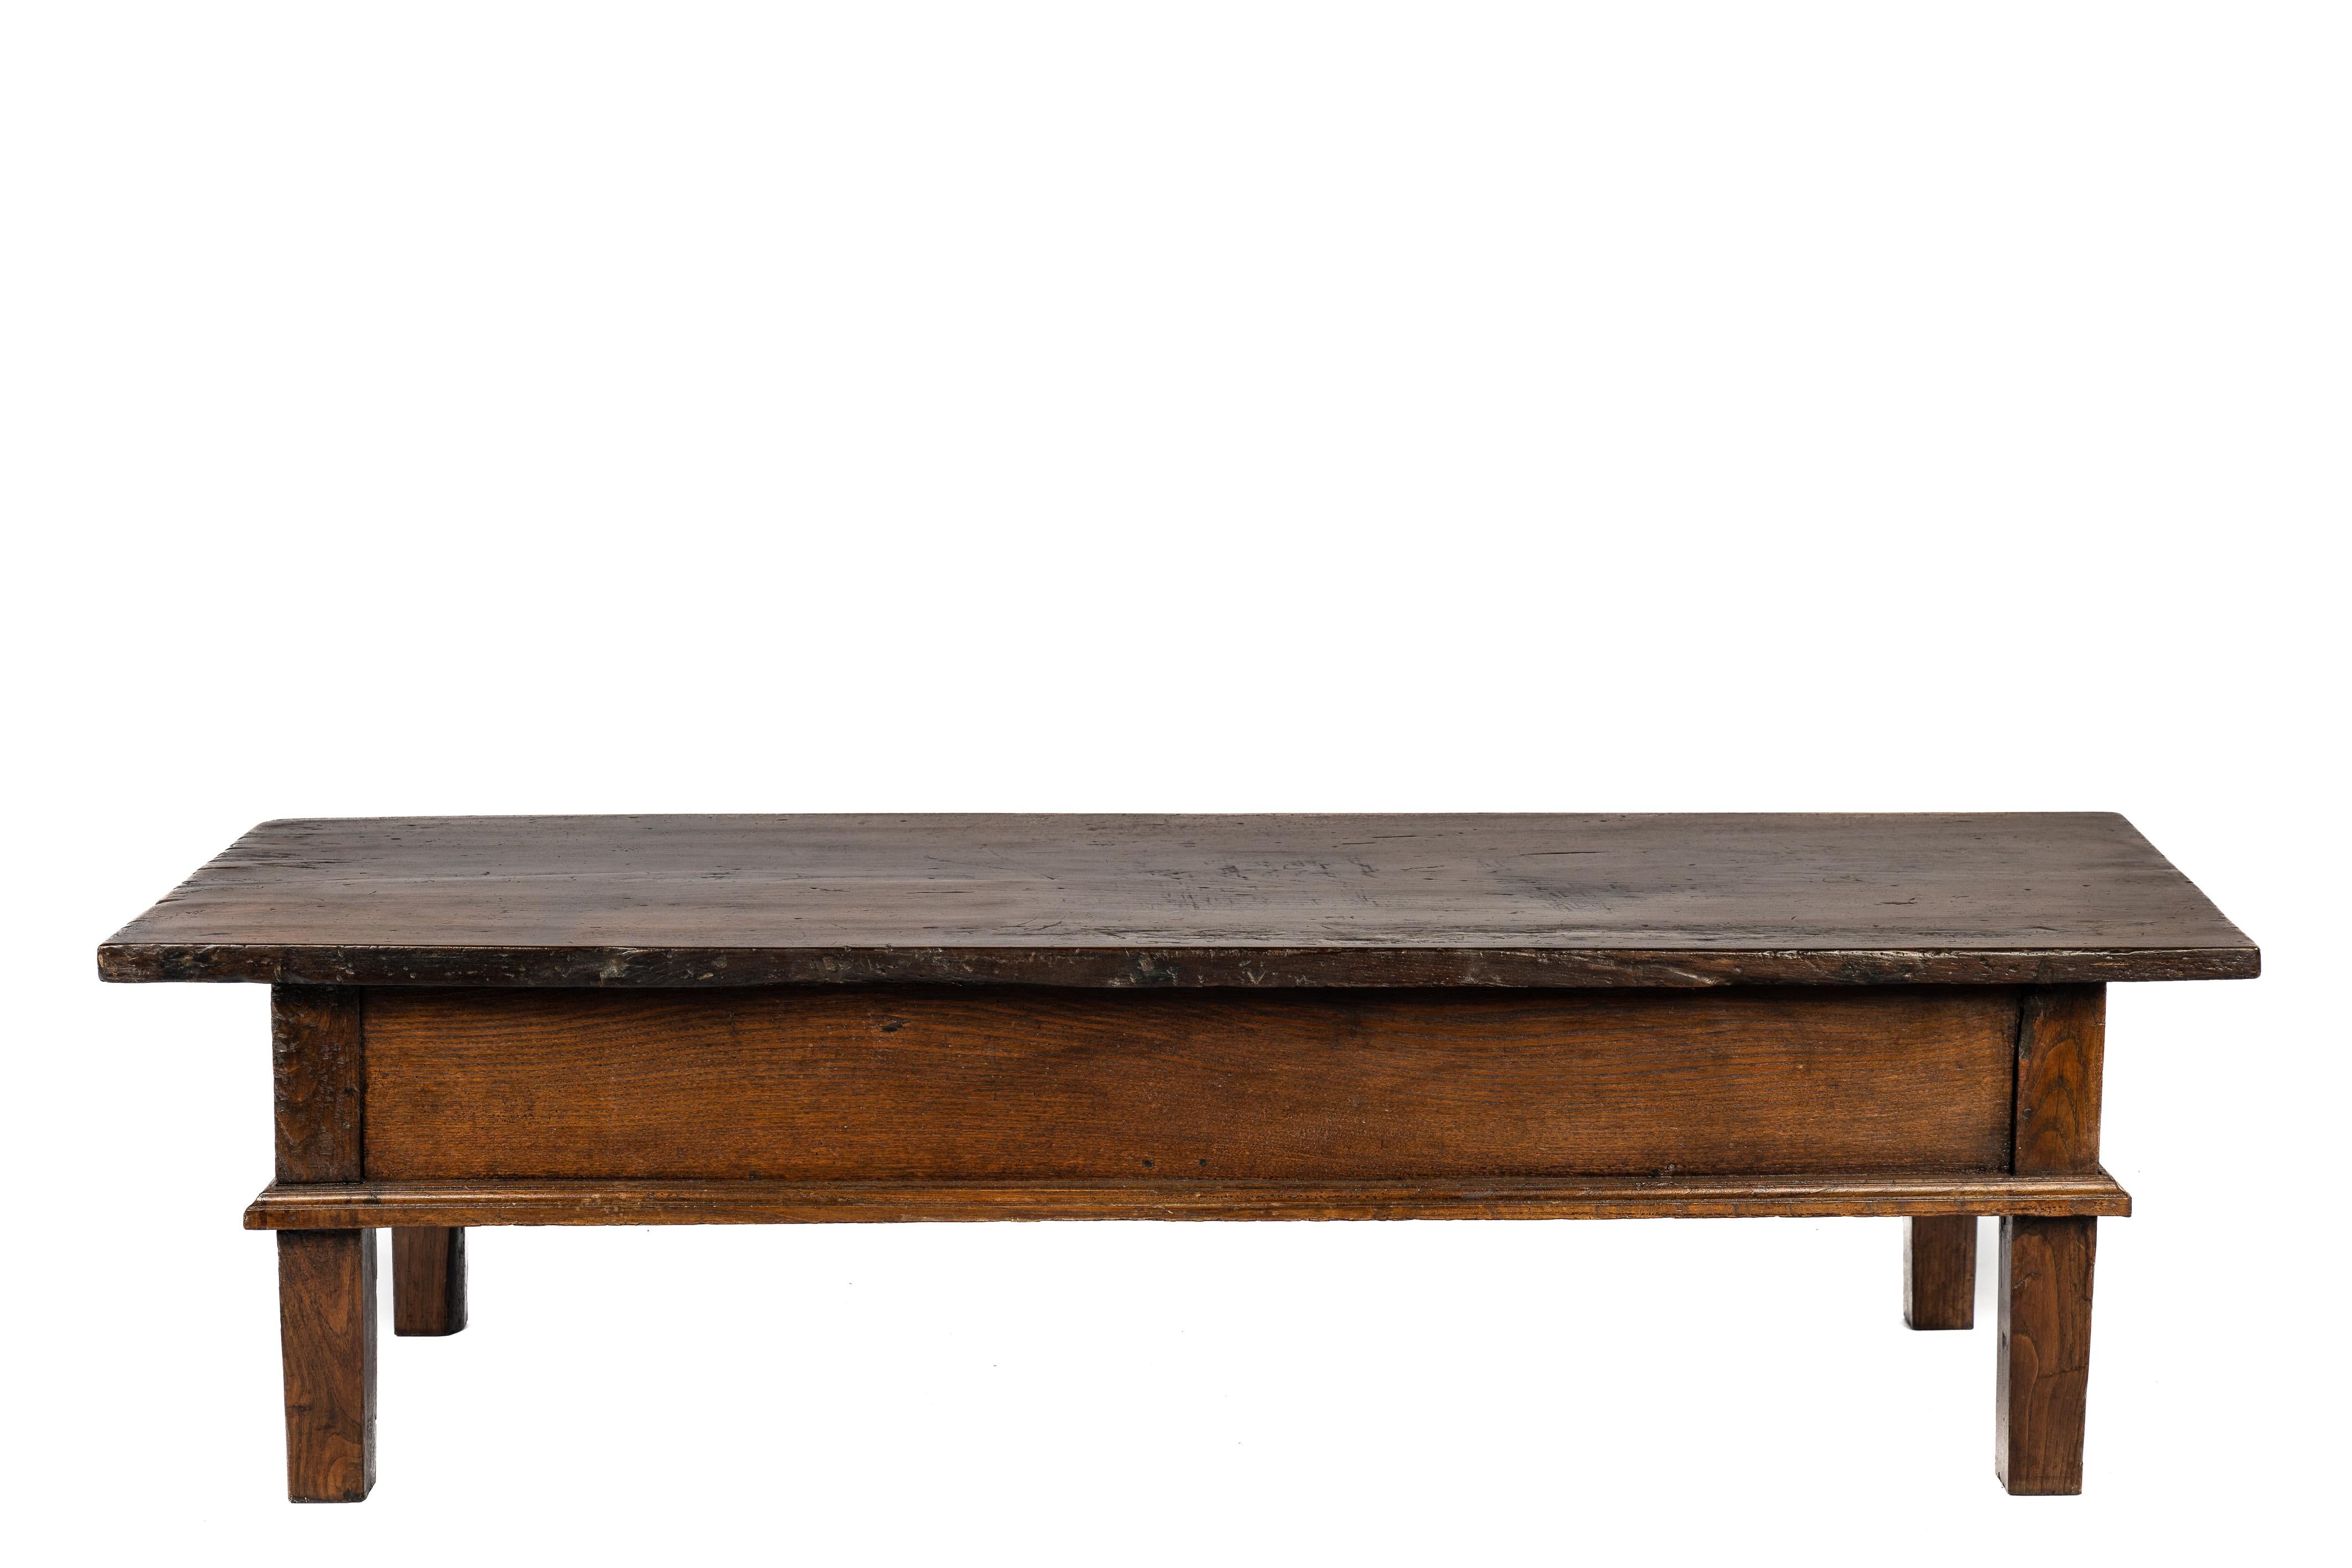 Antique Early 19th Century Rustic Spanish Warm Dark Brown Chestnut Coffee Table In Good Condition For Sale In Casteren, NL